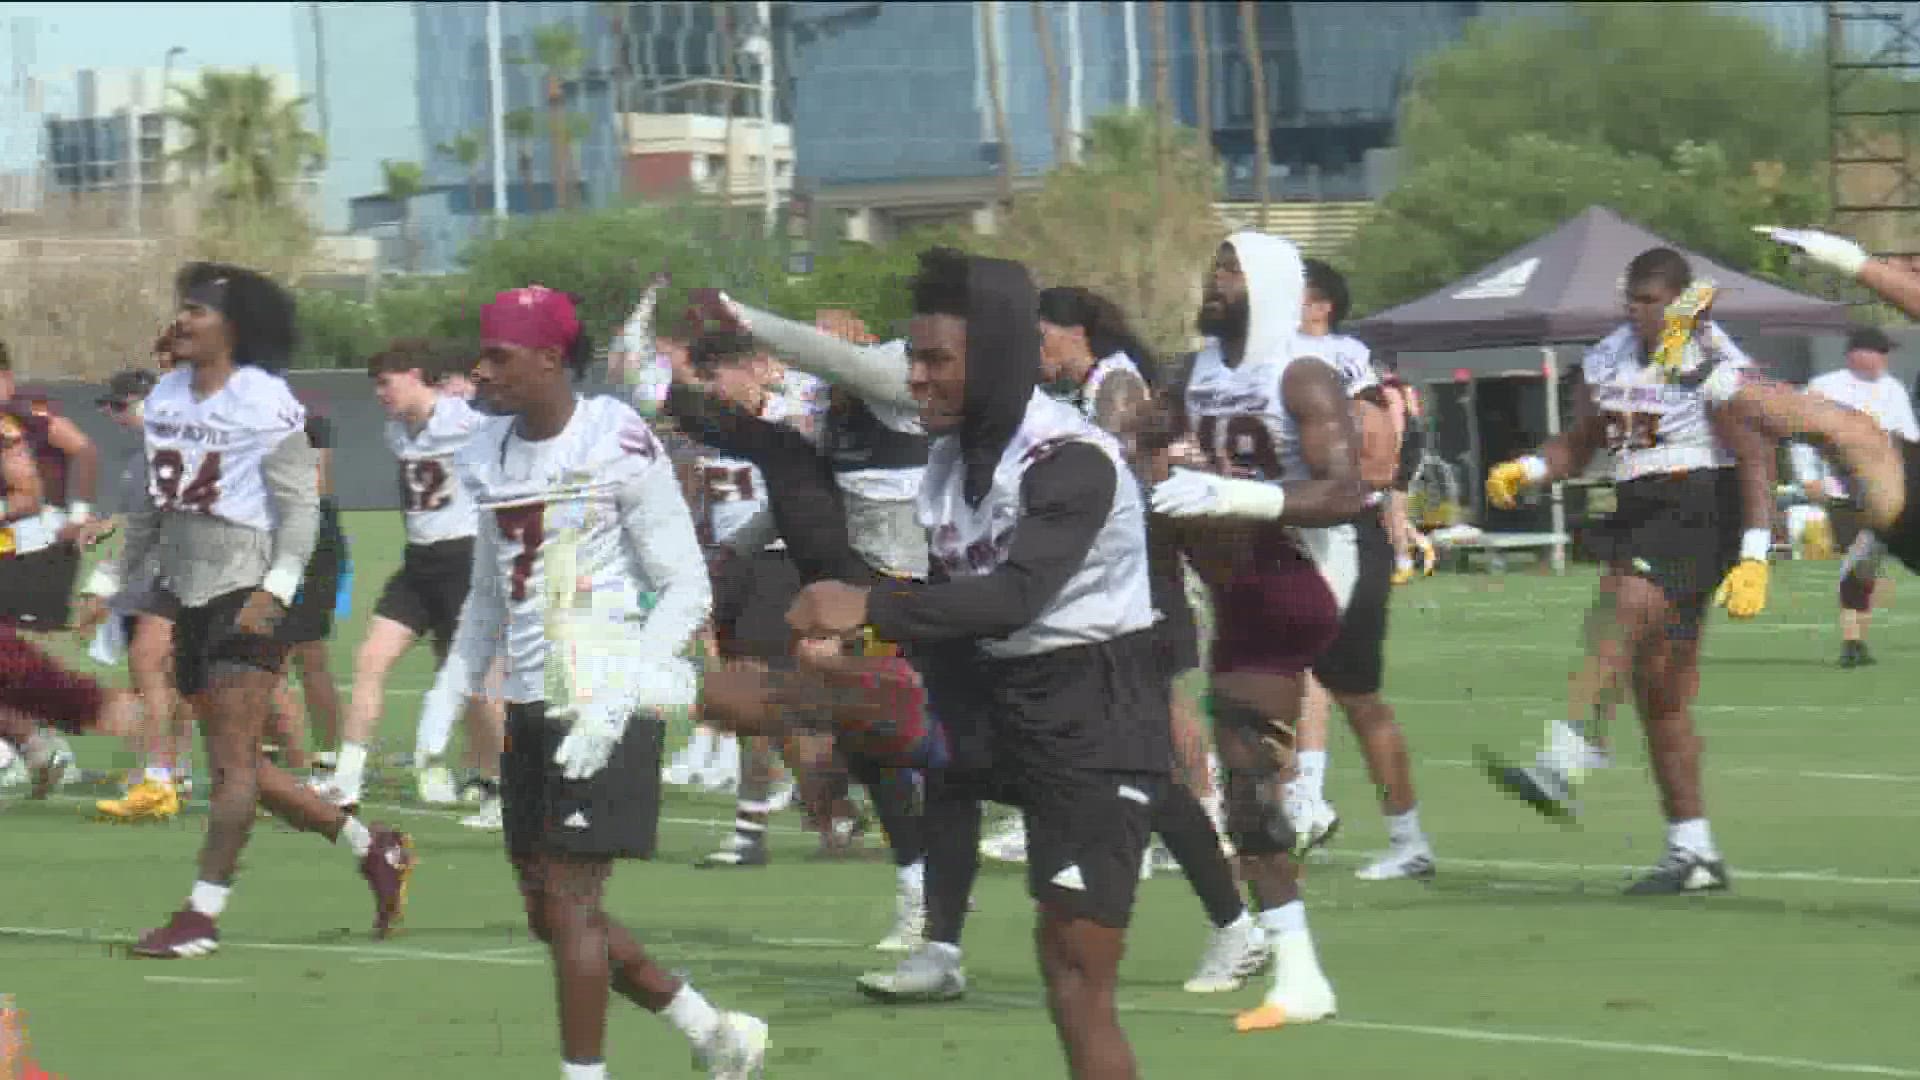 Arizona State football is a month out from their first game of the season against NAU. With over 30 new players on the roster, a lot of questions remain.